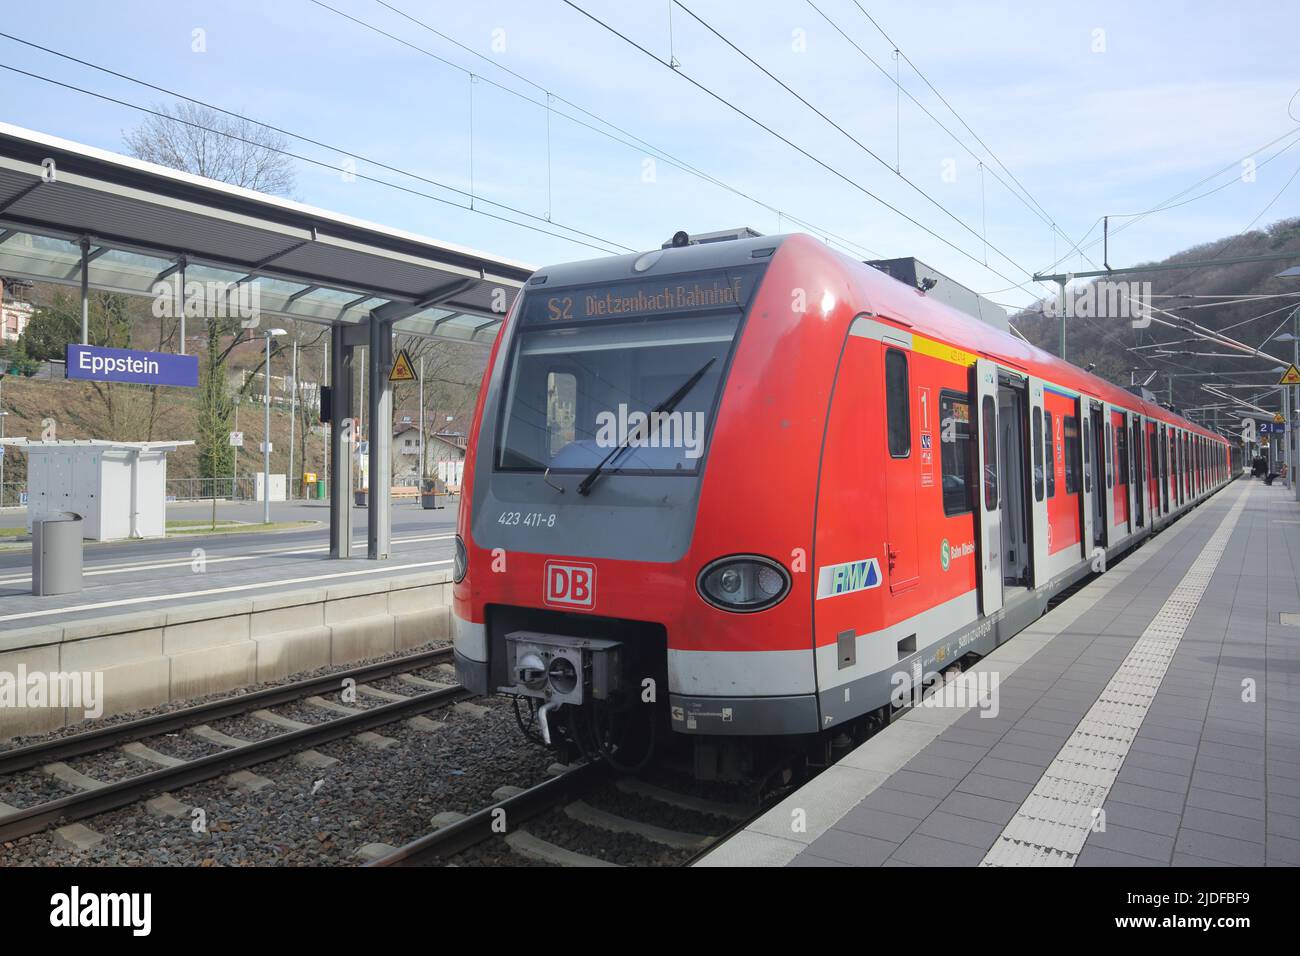 Railway station with S-Bahn train in Eppstein, Hesse, Germany Stock Photo